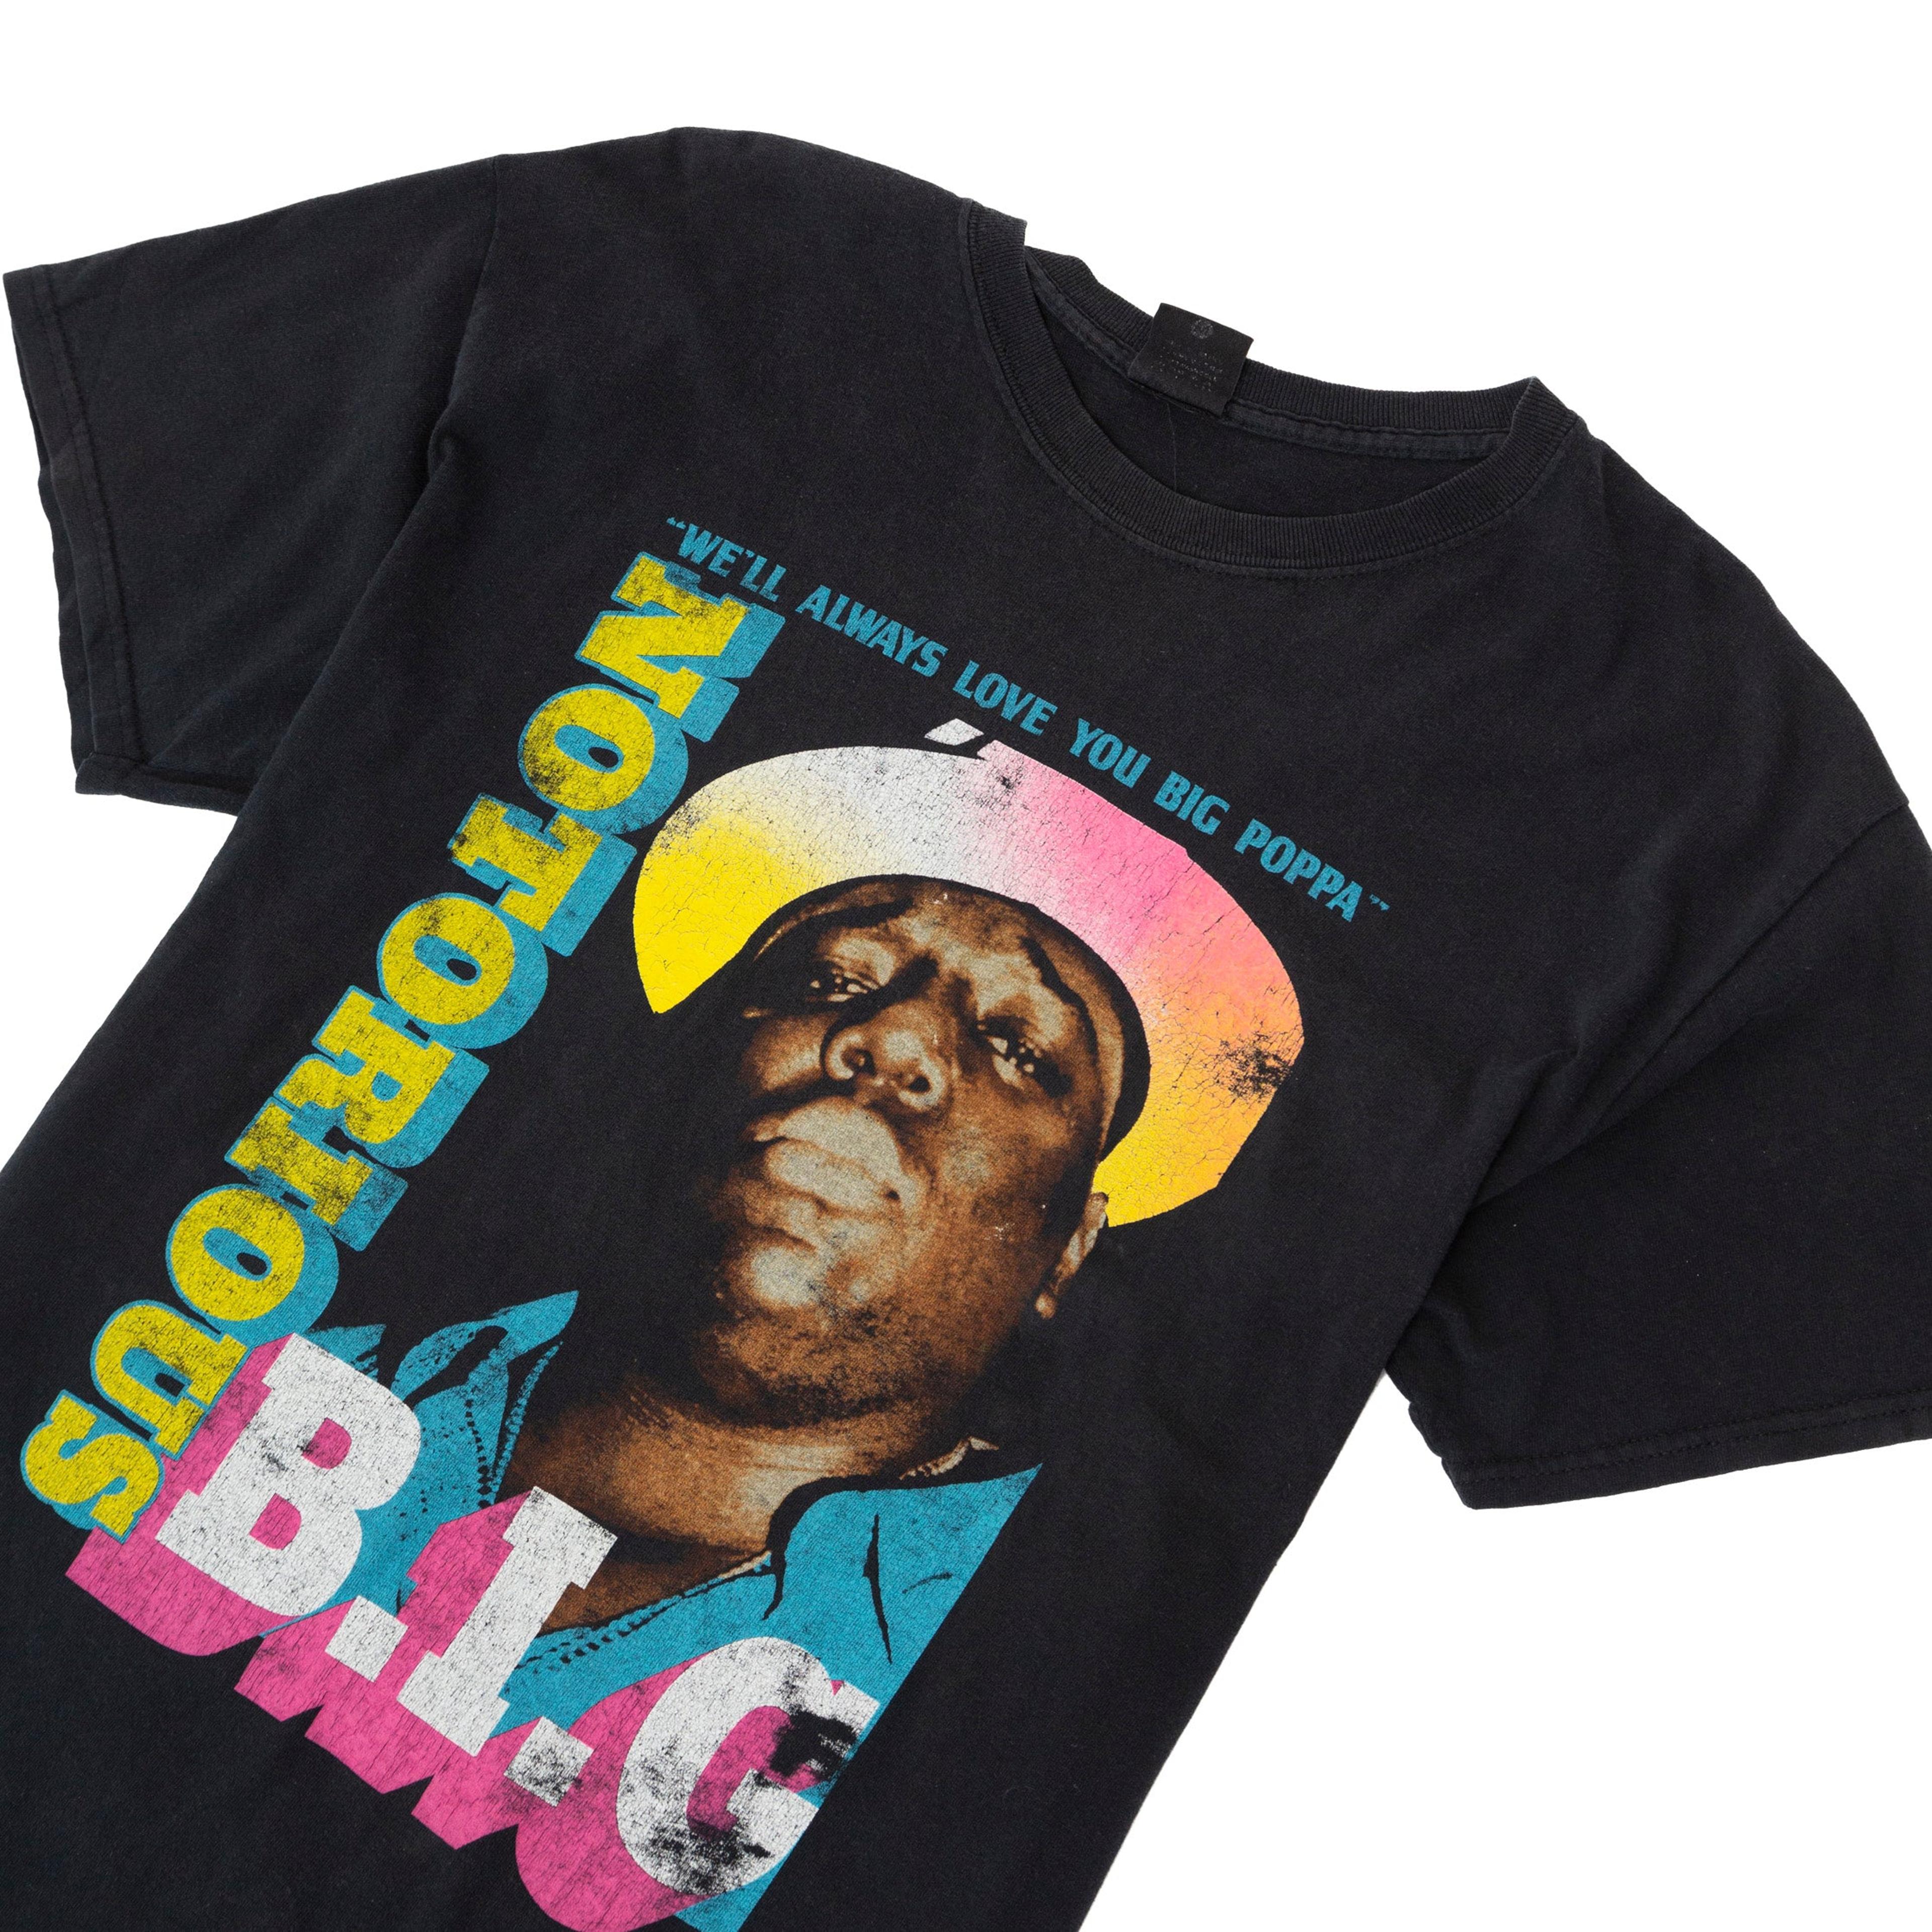 Alternate View 1 of Notorious B.I.G Graphic Tee